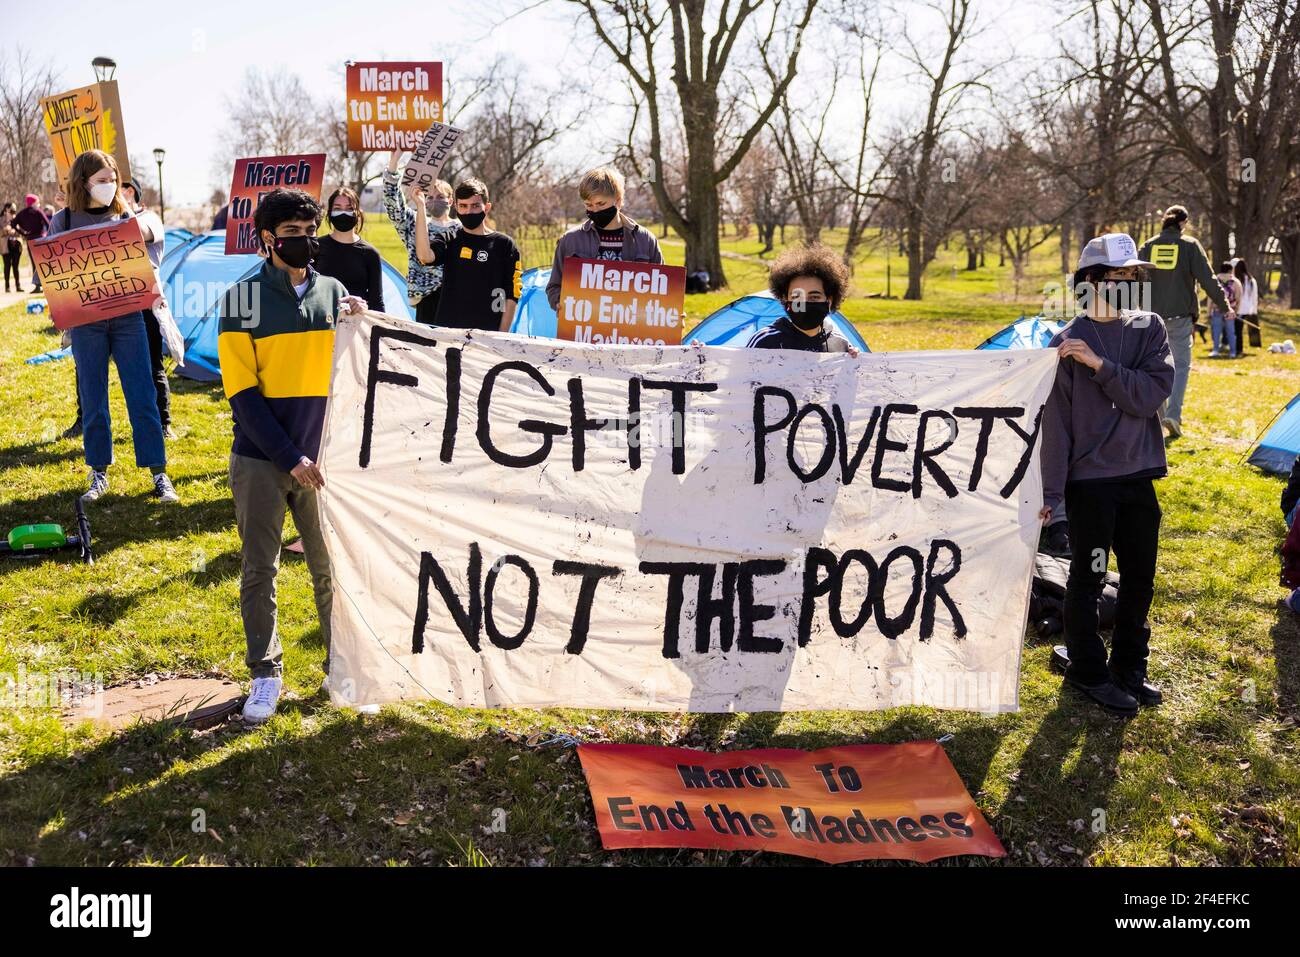 Fight Poverty Not the Poor - changes to social security